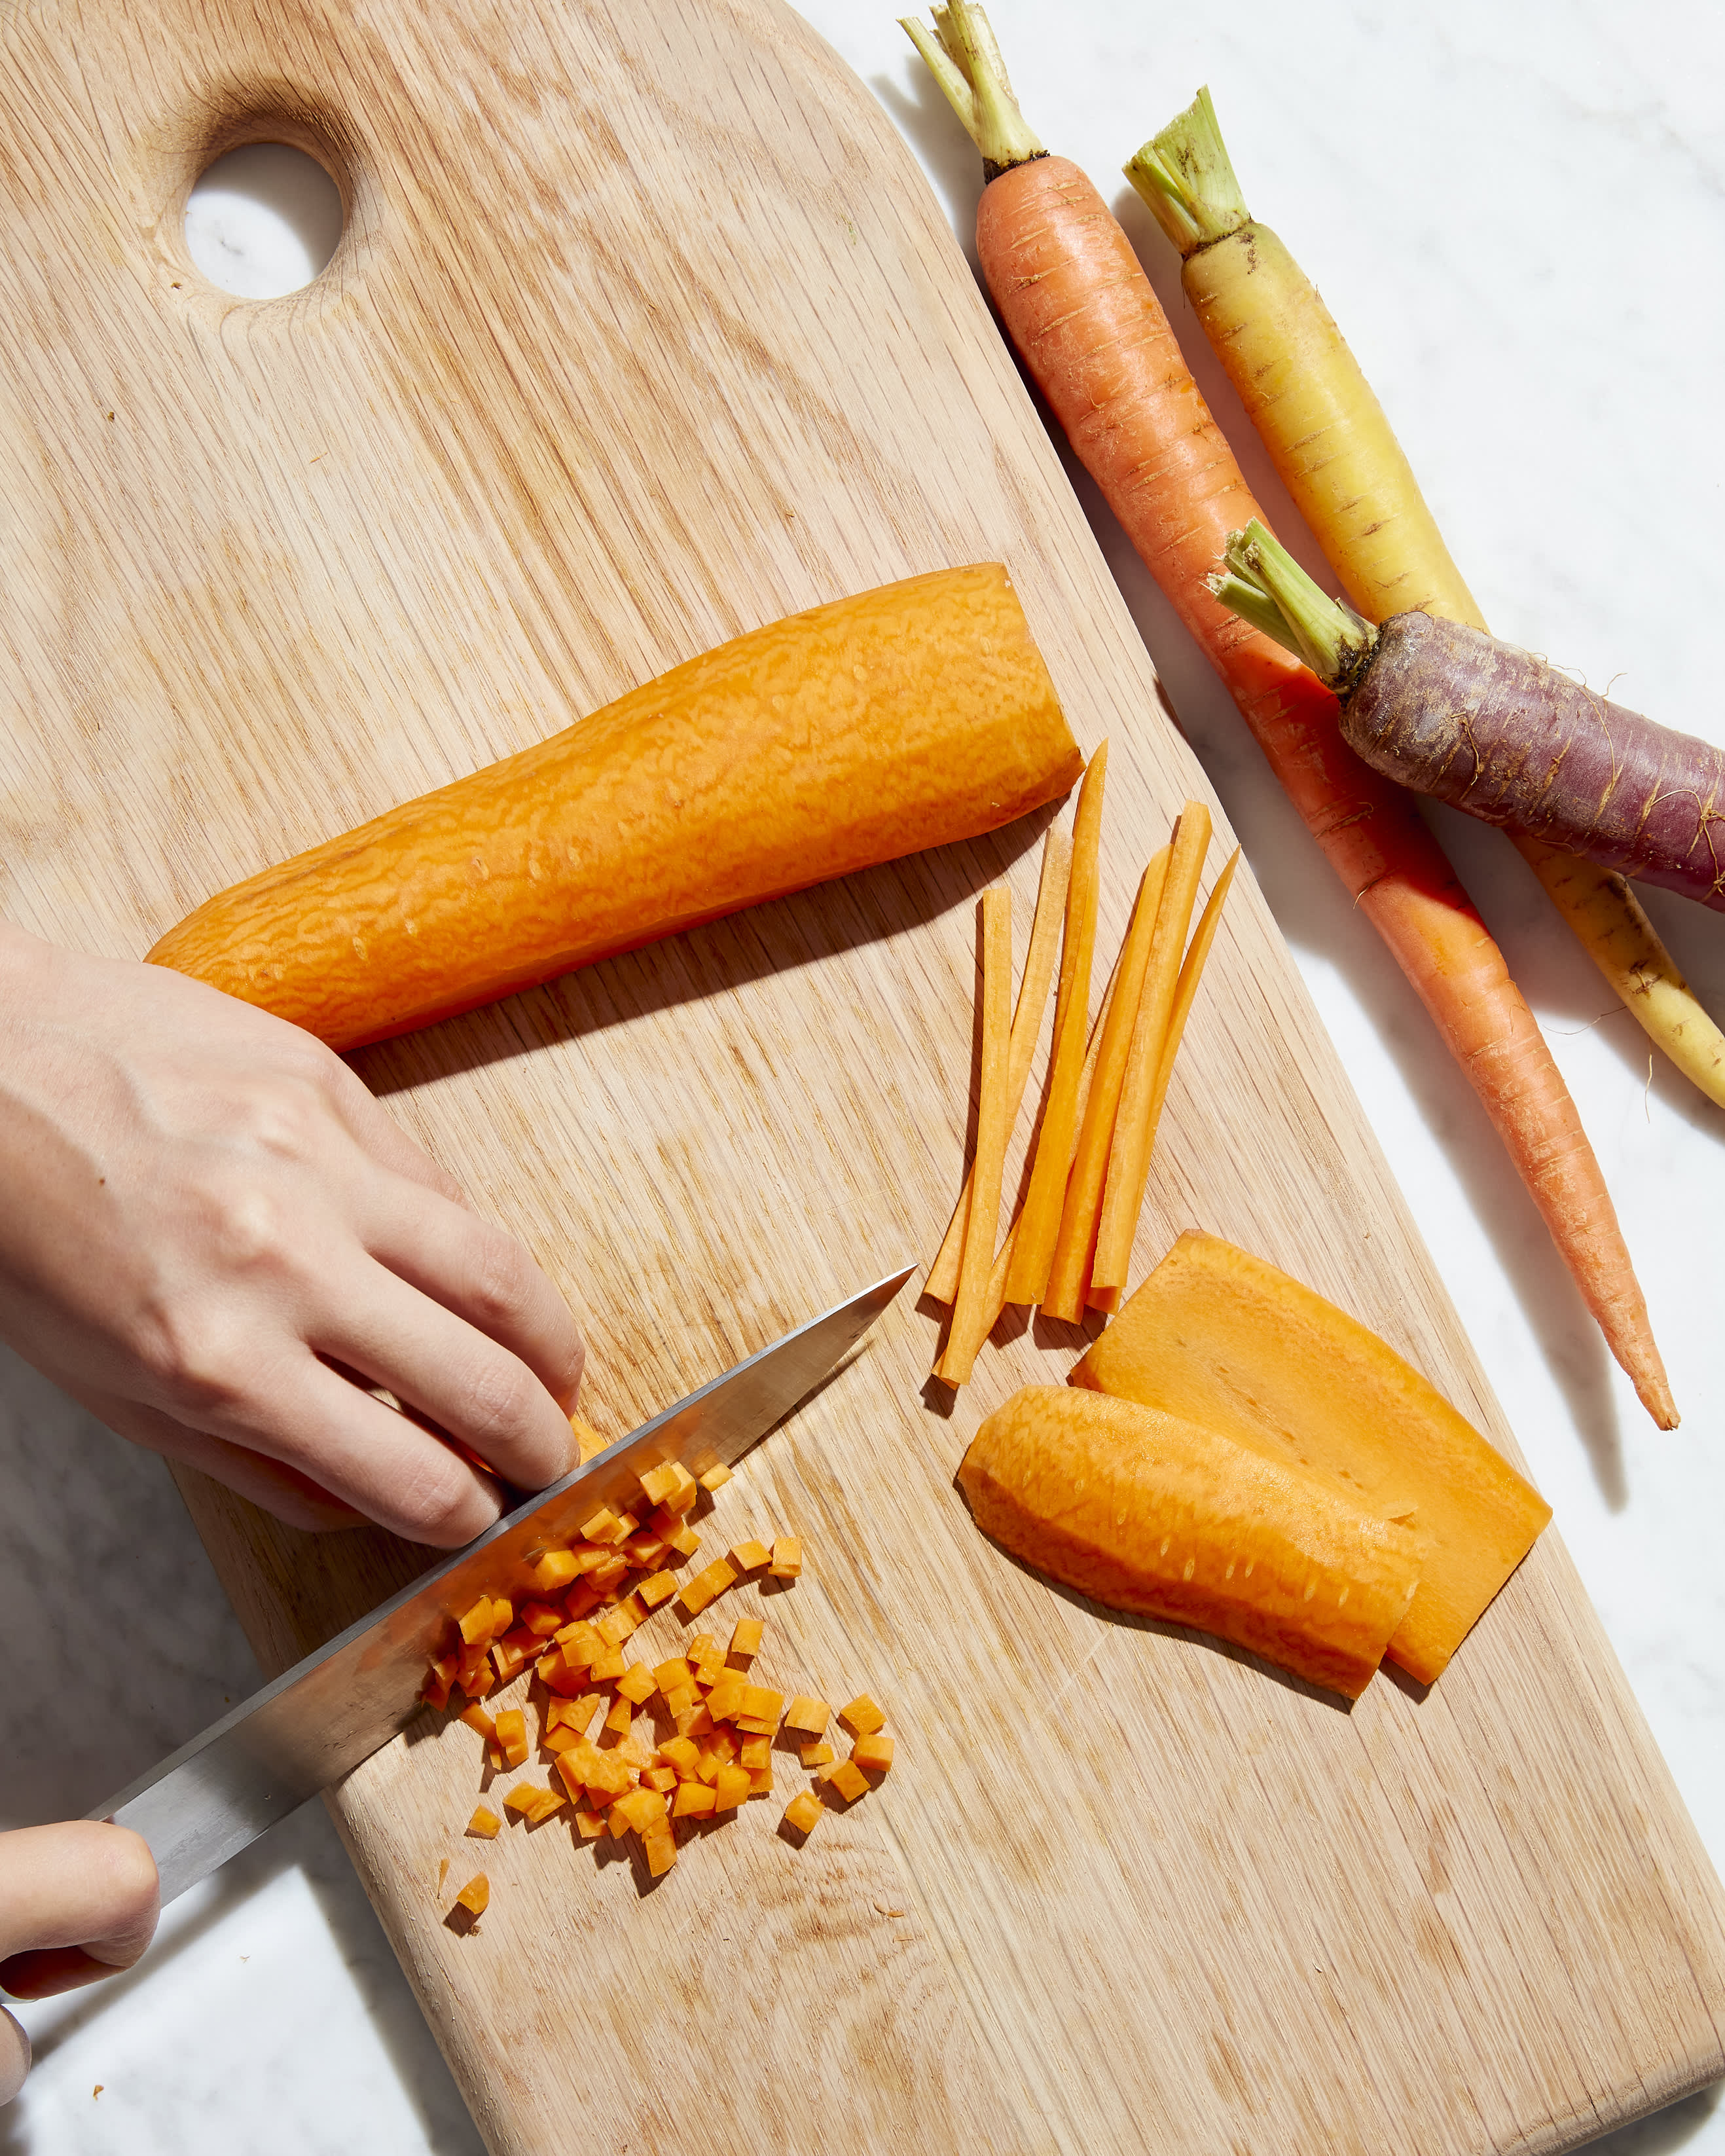 https://cdn.apartmenttherapy.info/image/upload/v1660582284/k/Photo/Series/2022-09-how-to-cut-carrots/How-to-Cut-Carrots-156.jpg